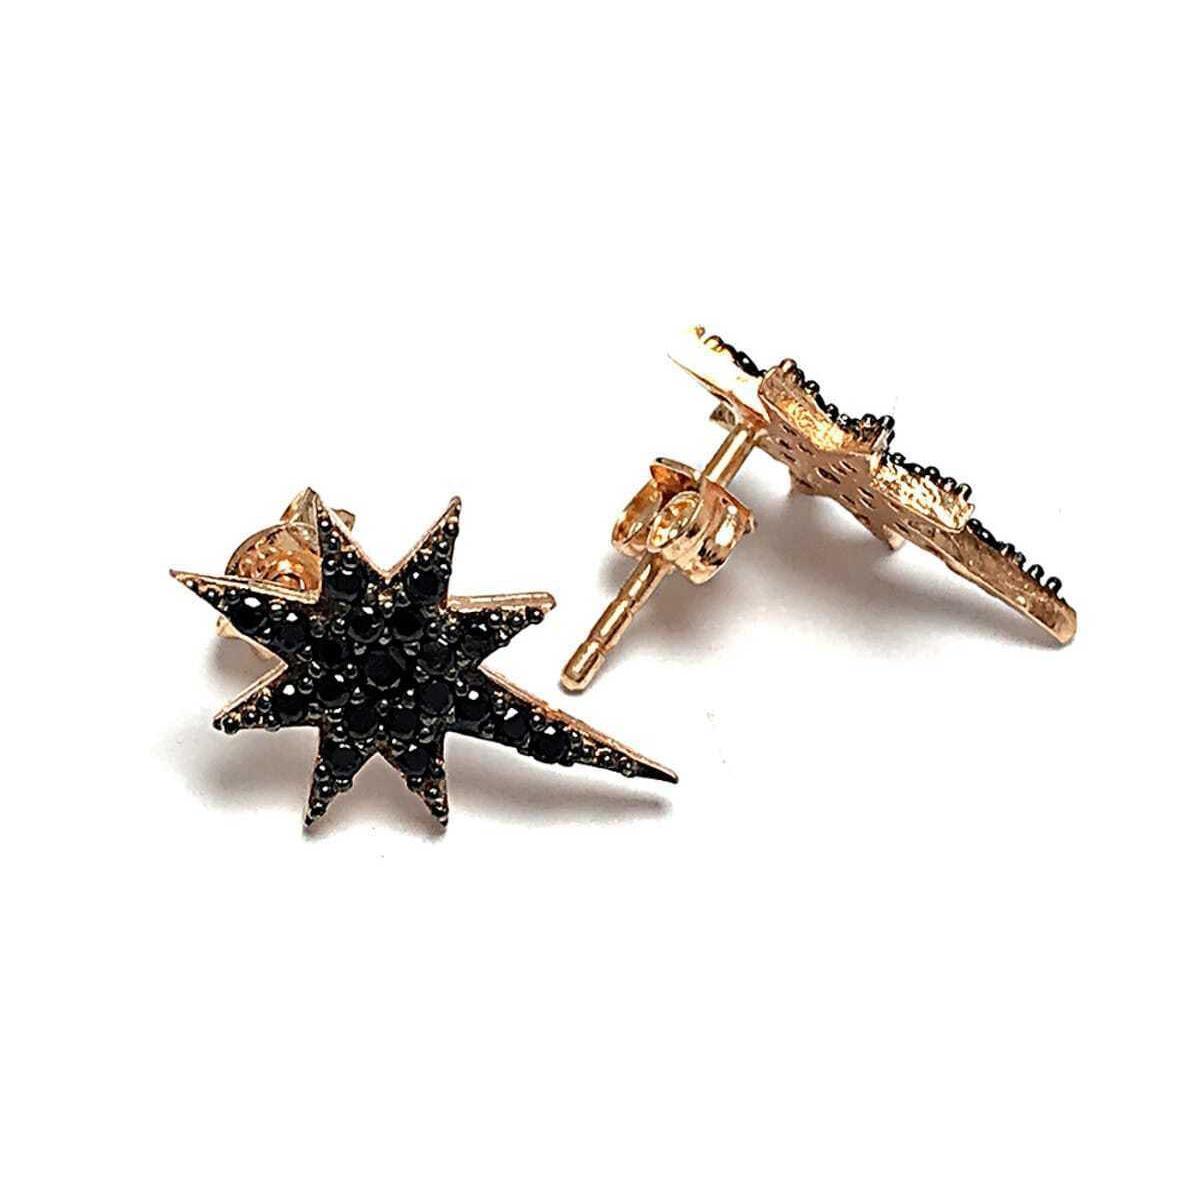 North Star Earrings Gold • North Star Earrings Silver • Gift For Her - Trending Silver Gifts